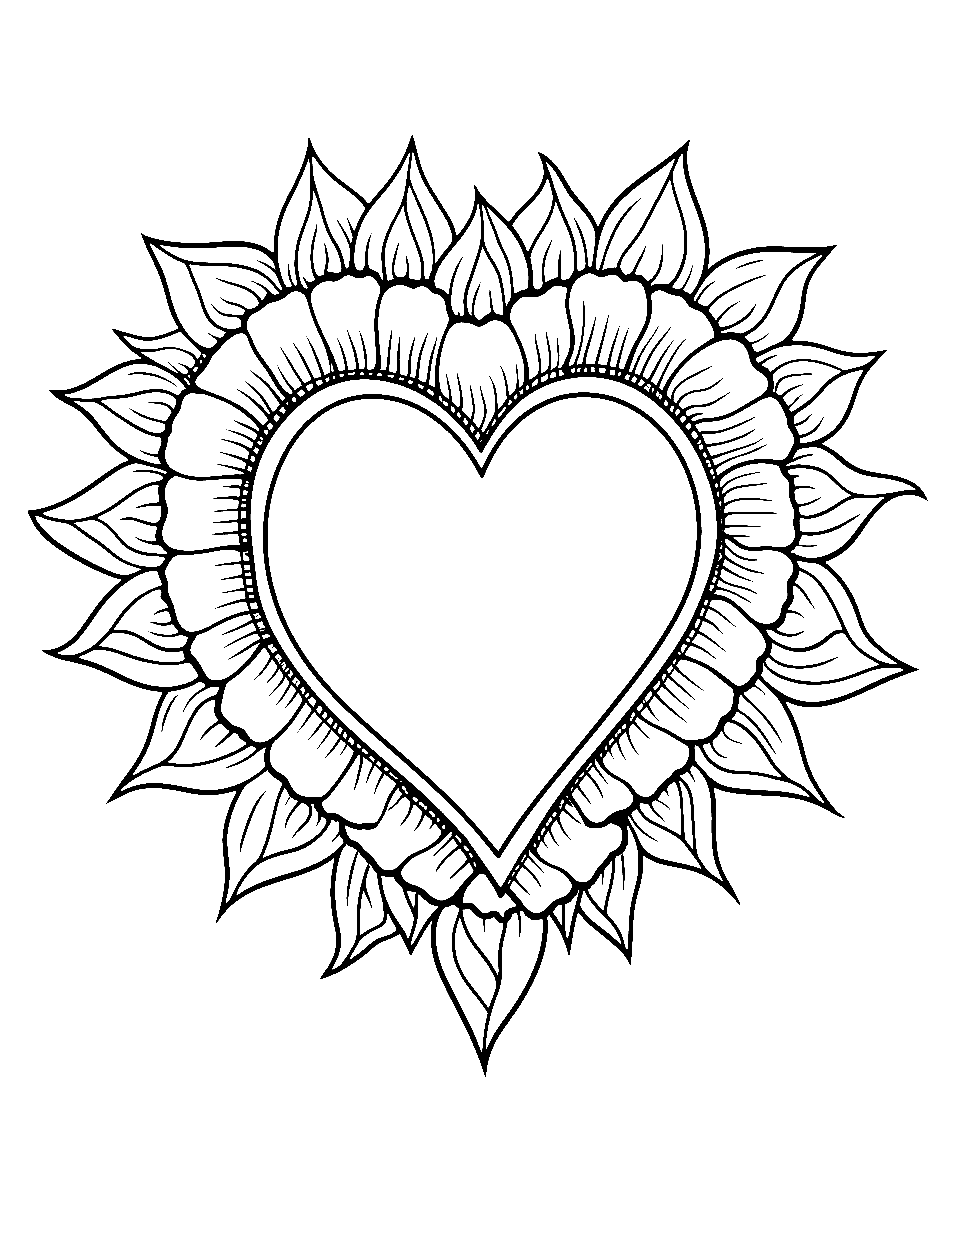 Sunflower with Heart Coloring Page - A sunflower with the center shaped uniquely like a heart.